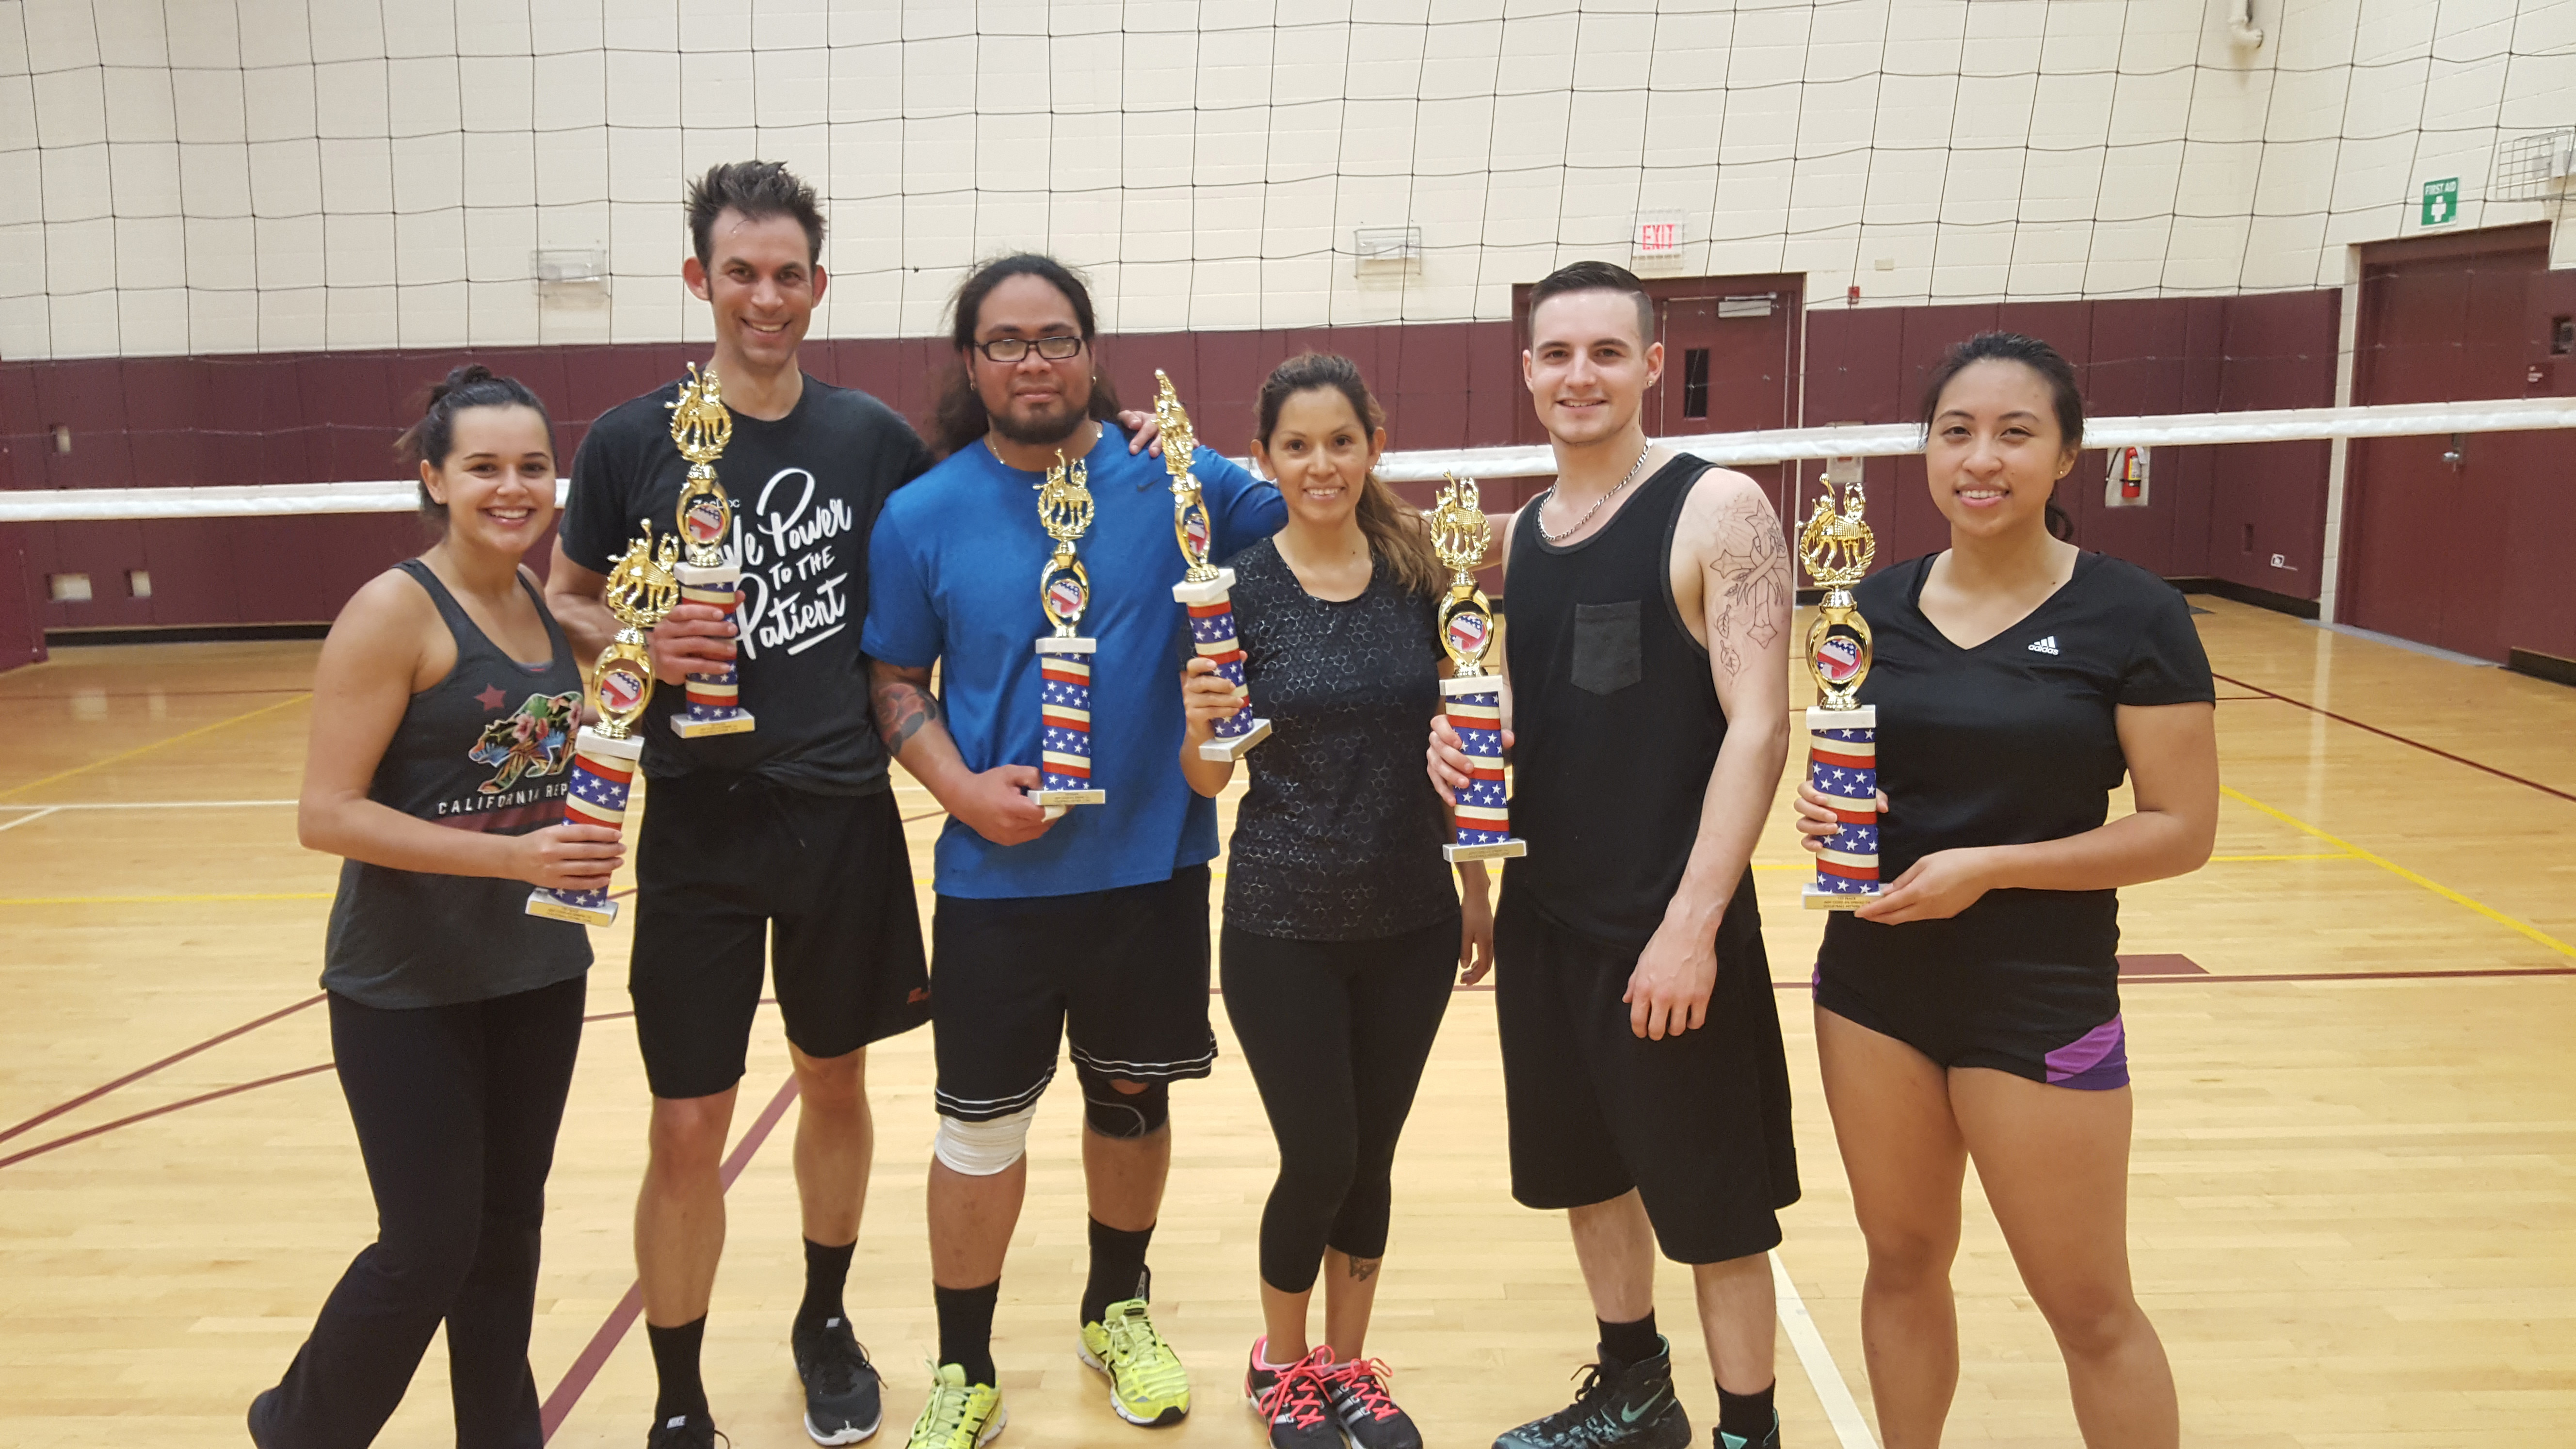 Volleyball Hitters Club Team wins!